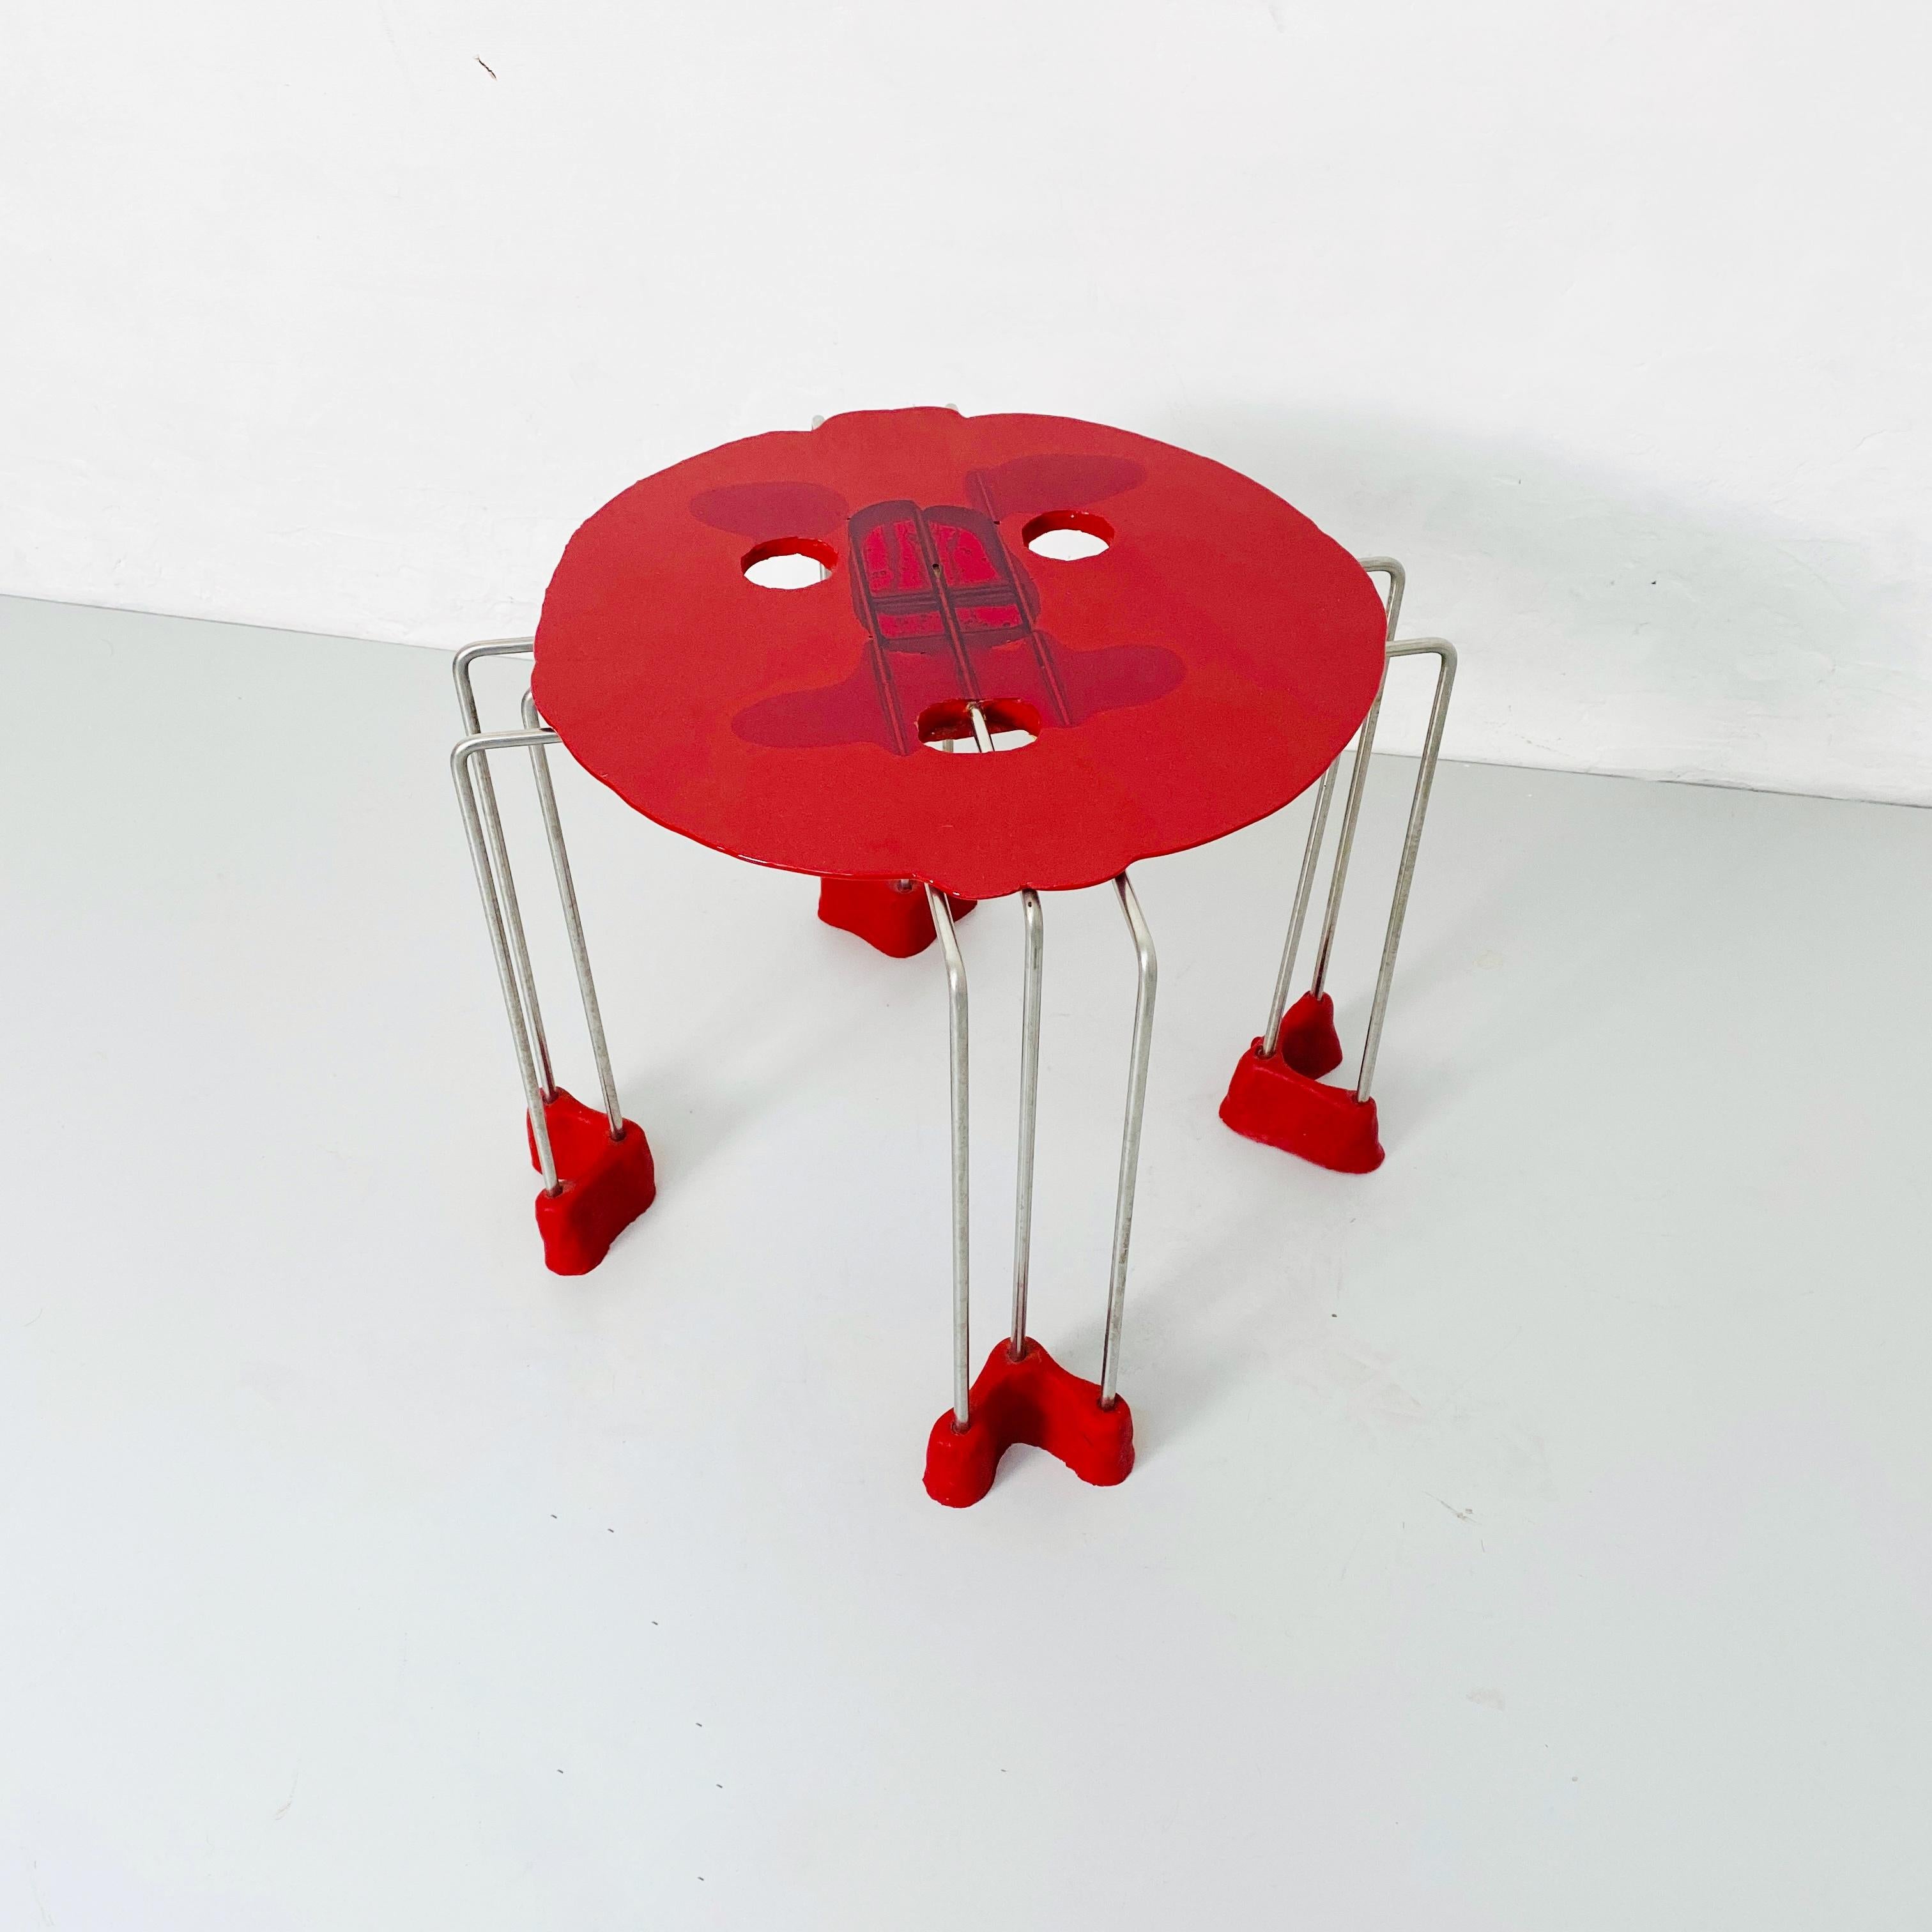 Italian Modern Triple Play Resin Stool by Gaetano Pesce for Fish Design, 2000s For Sale 4